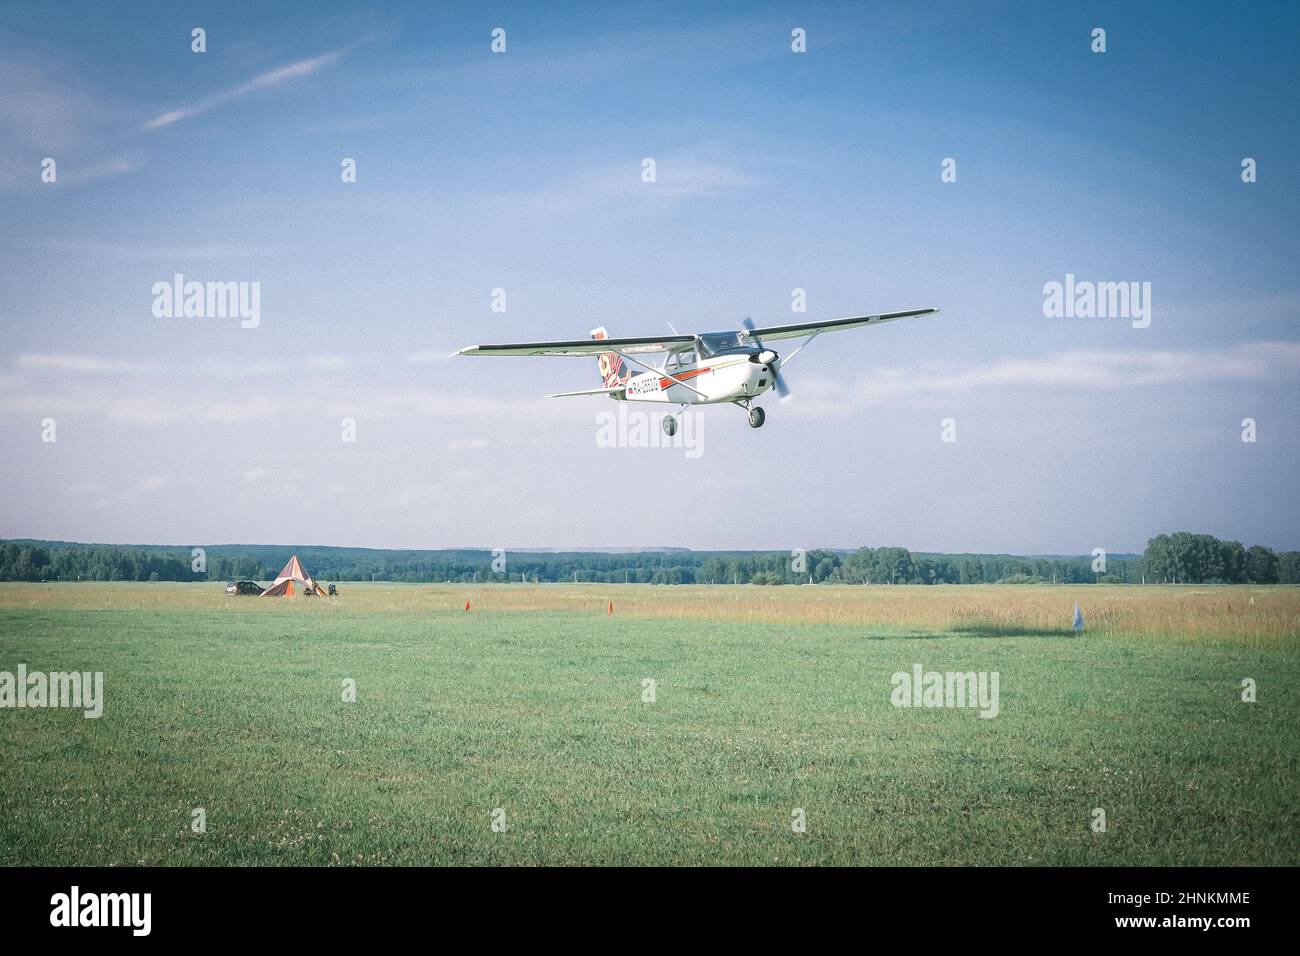 3 July 2021, Russia. Kemerovo, a small aircraft fly Stock Photo